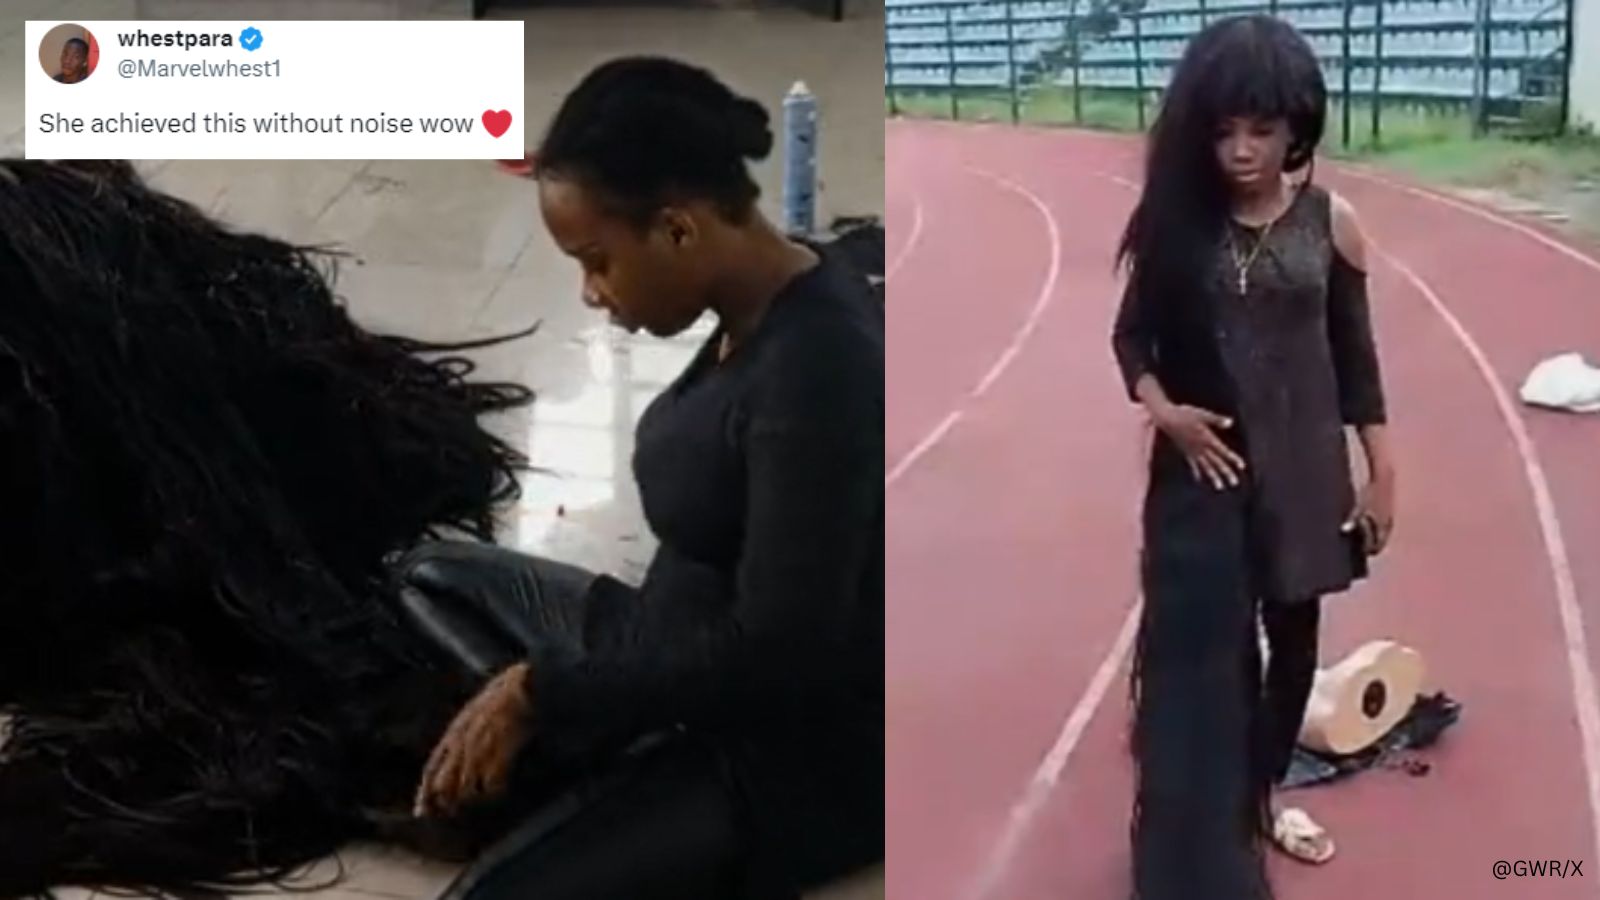 Nigerian Woman Sports Longest Handmade Wig Shatters Records Trending News The Indian Express 